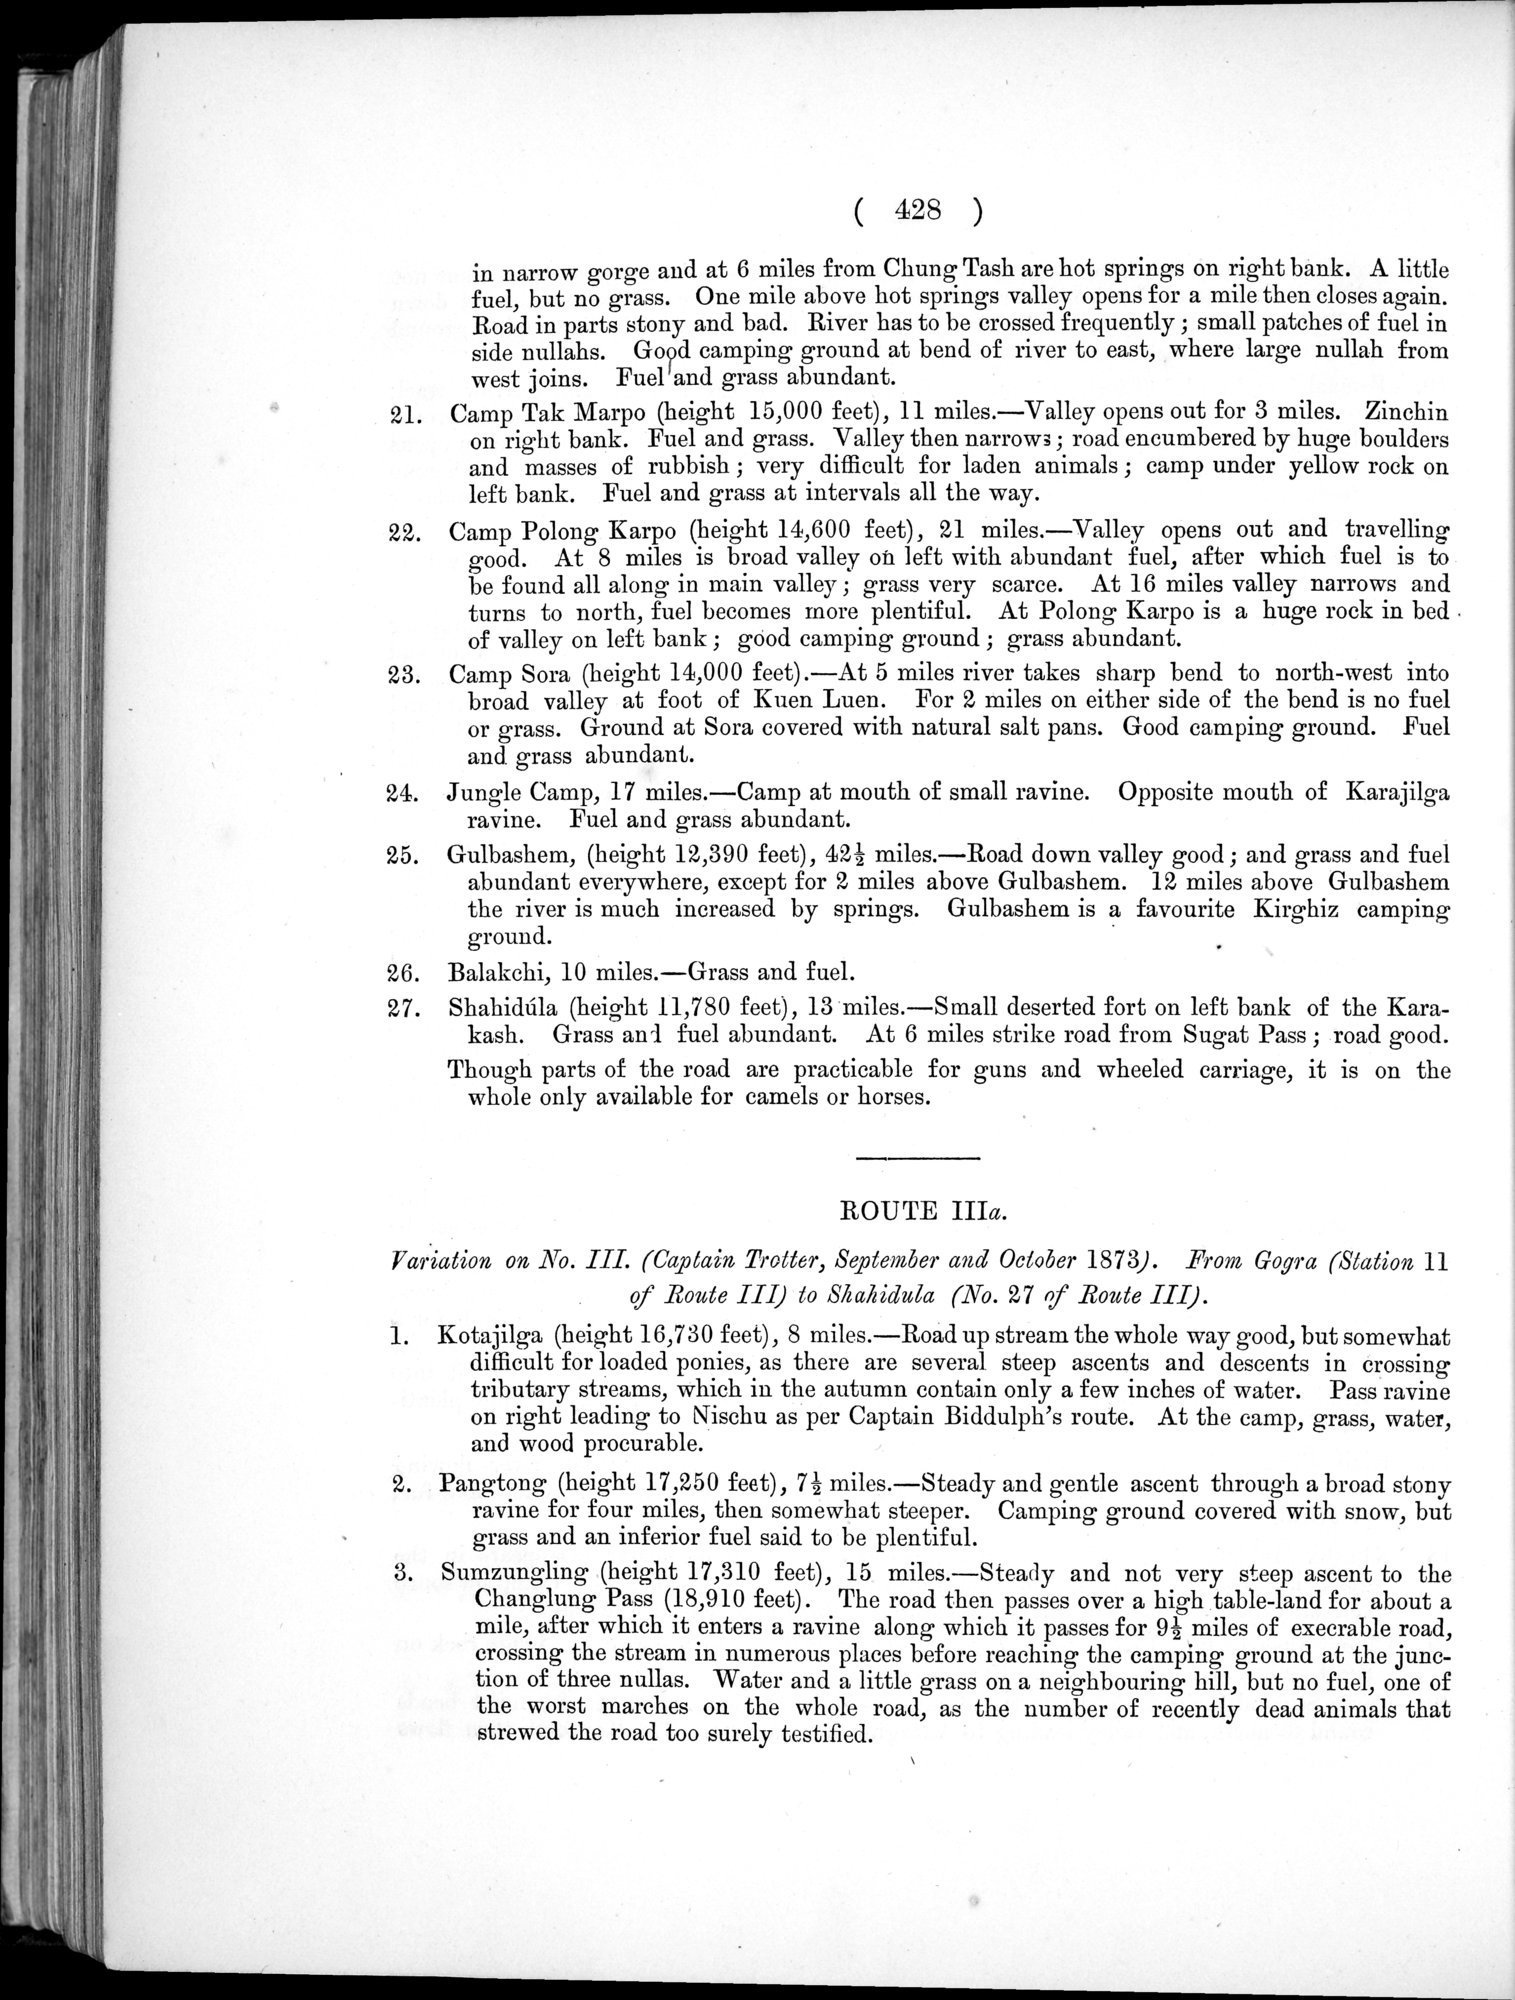 Report of a Mission to Yarkund in 1873 : vol.1 / Page 562 (Grayscale High Resolution Image)